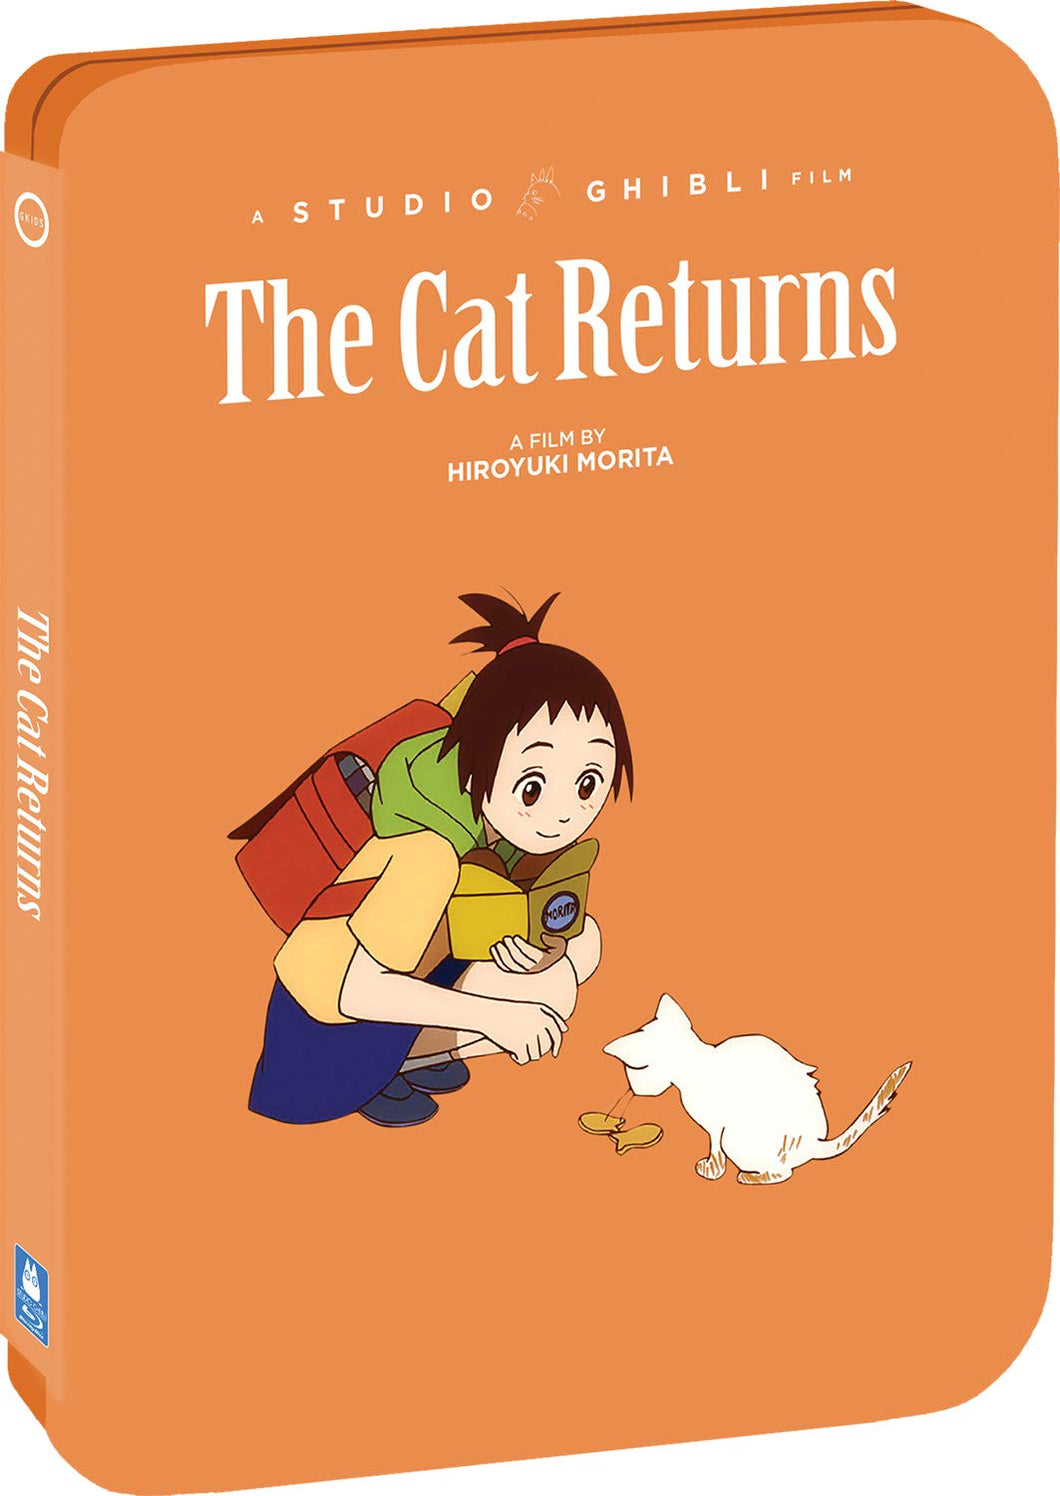 The Cat Returns (Limited Edition Steelbook)(Blu-ray)